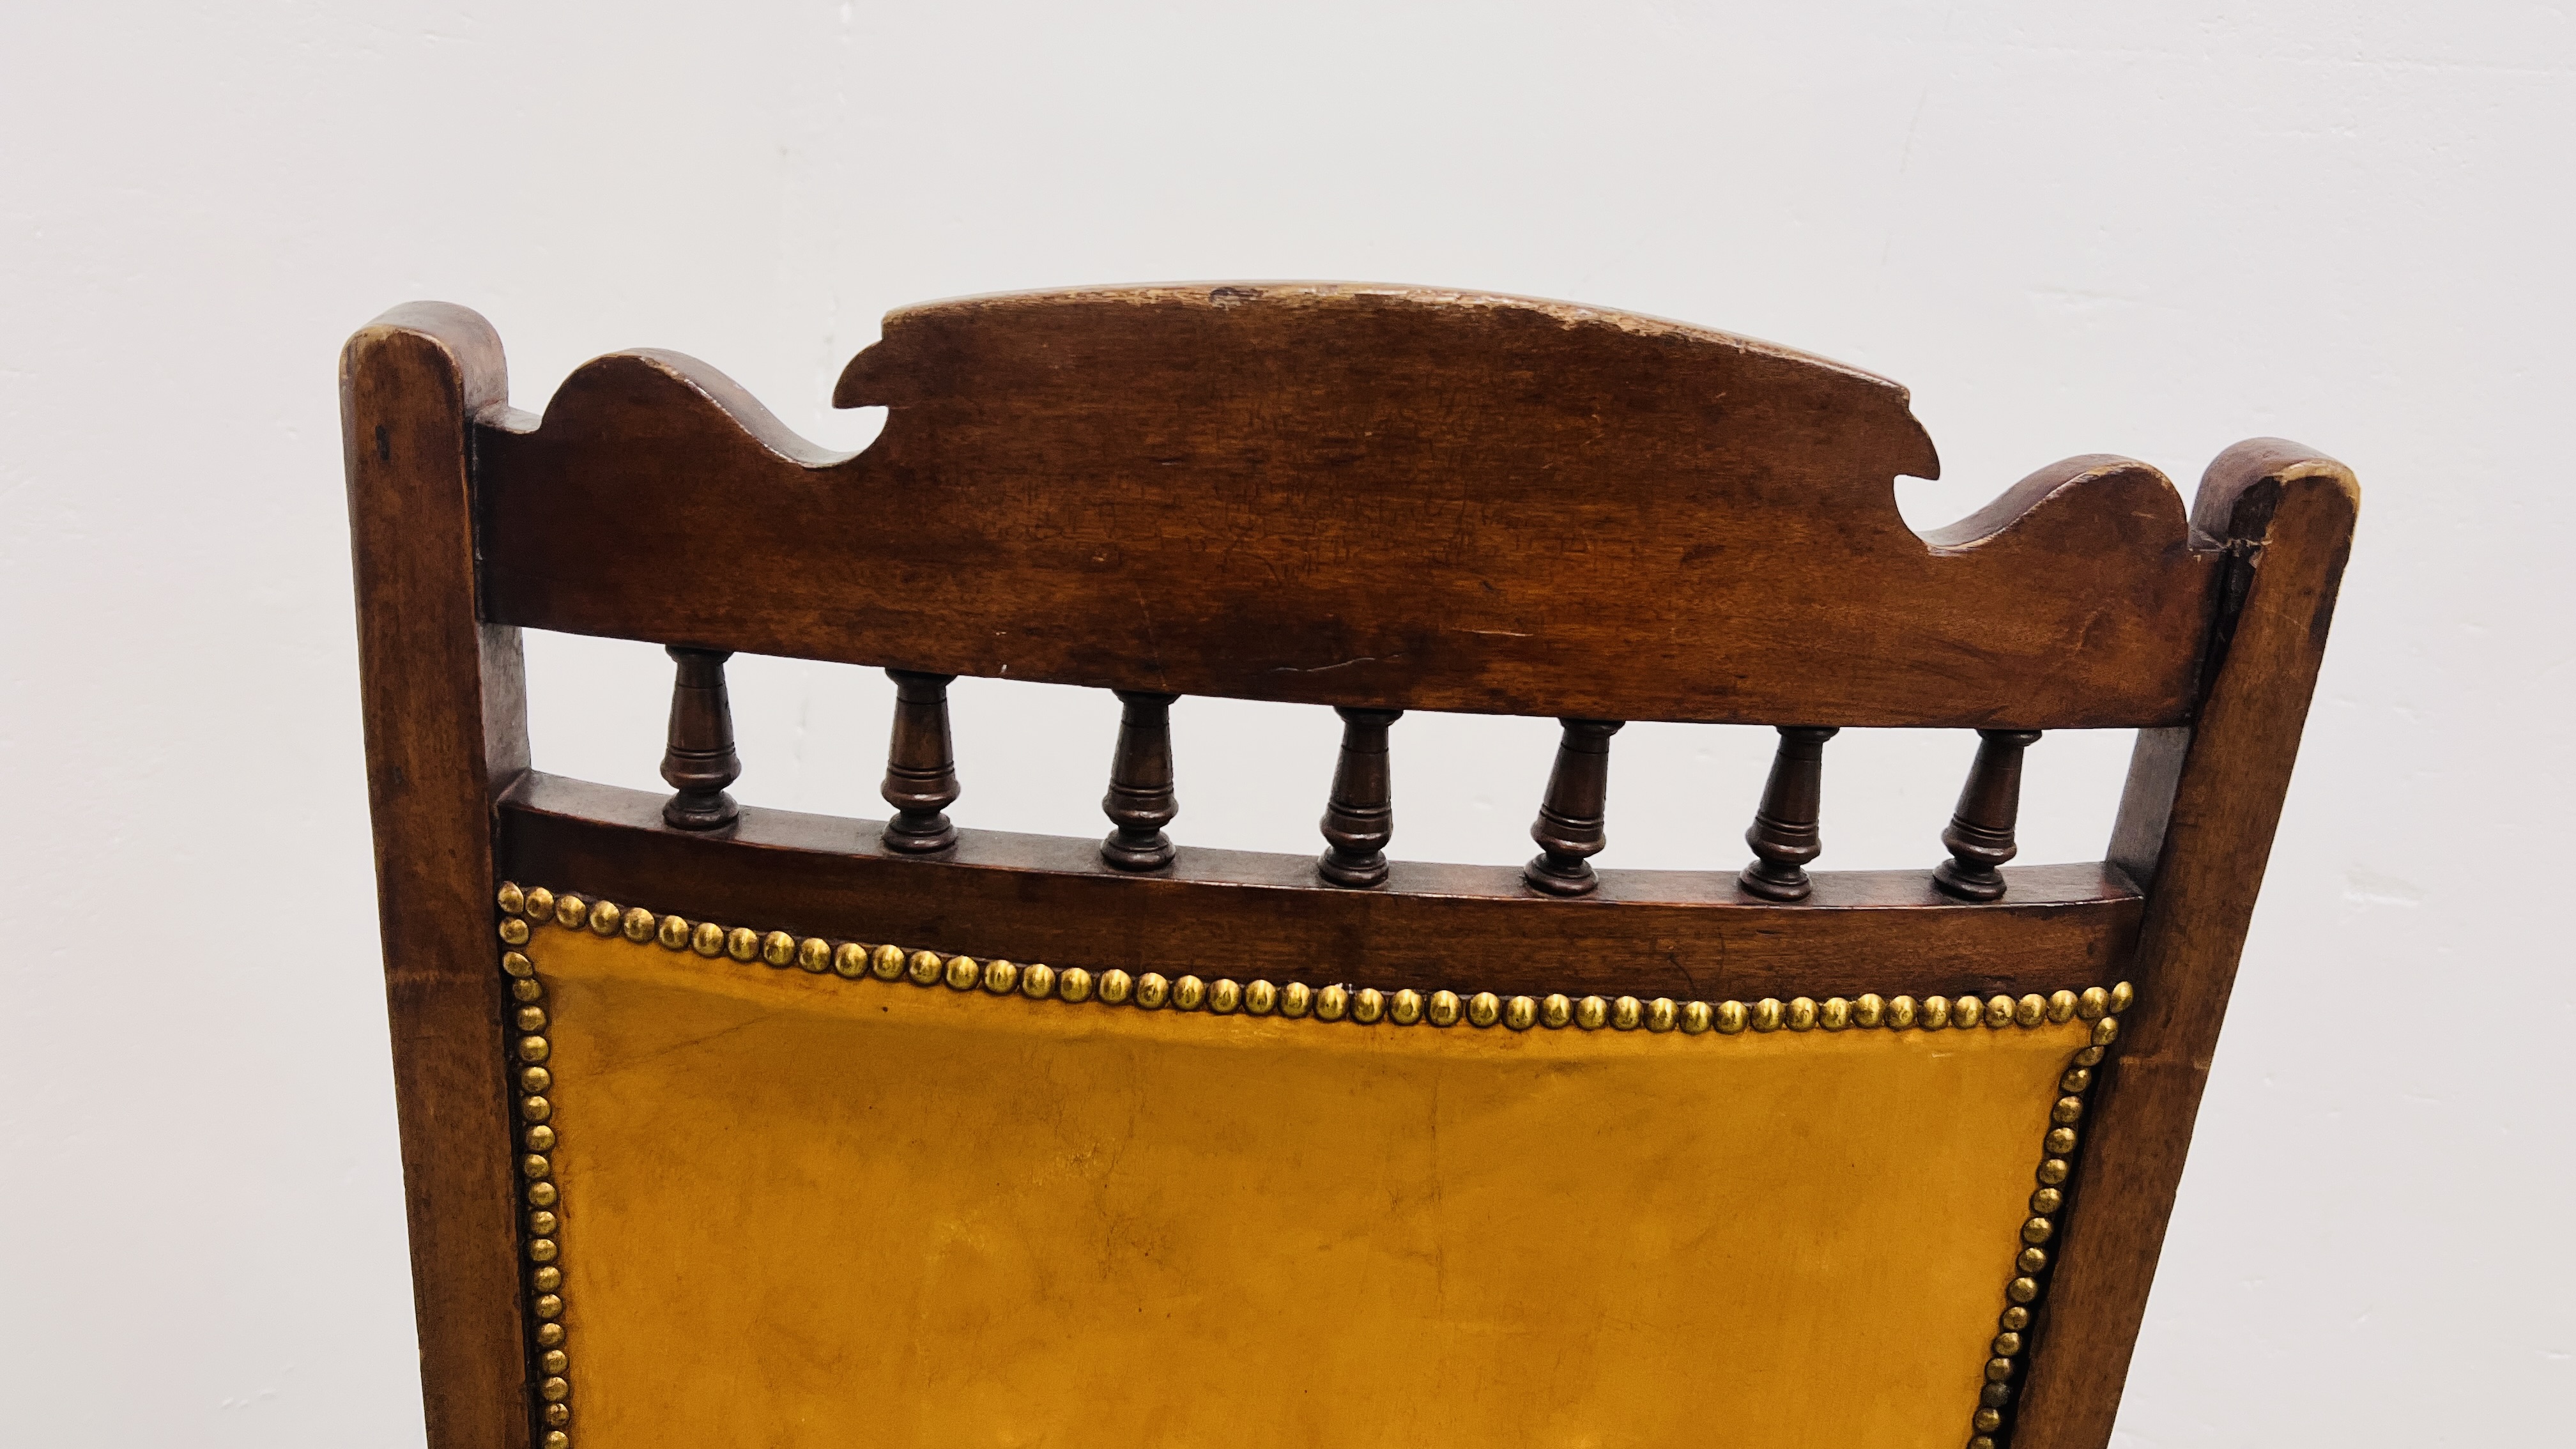 ANTIQUE EDWARDIAN MAHOGANY LOW CHAIR UPHOLSTERED IN TAN LEATHER - BUTTON BACK. - Image 9 of 12